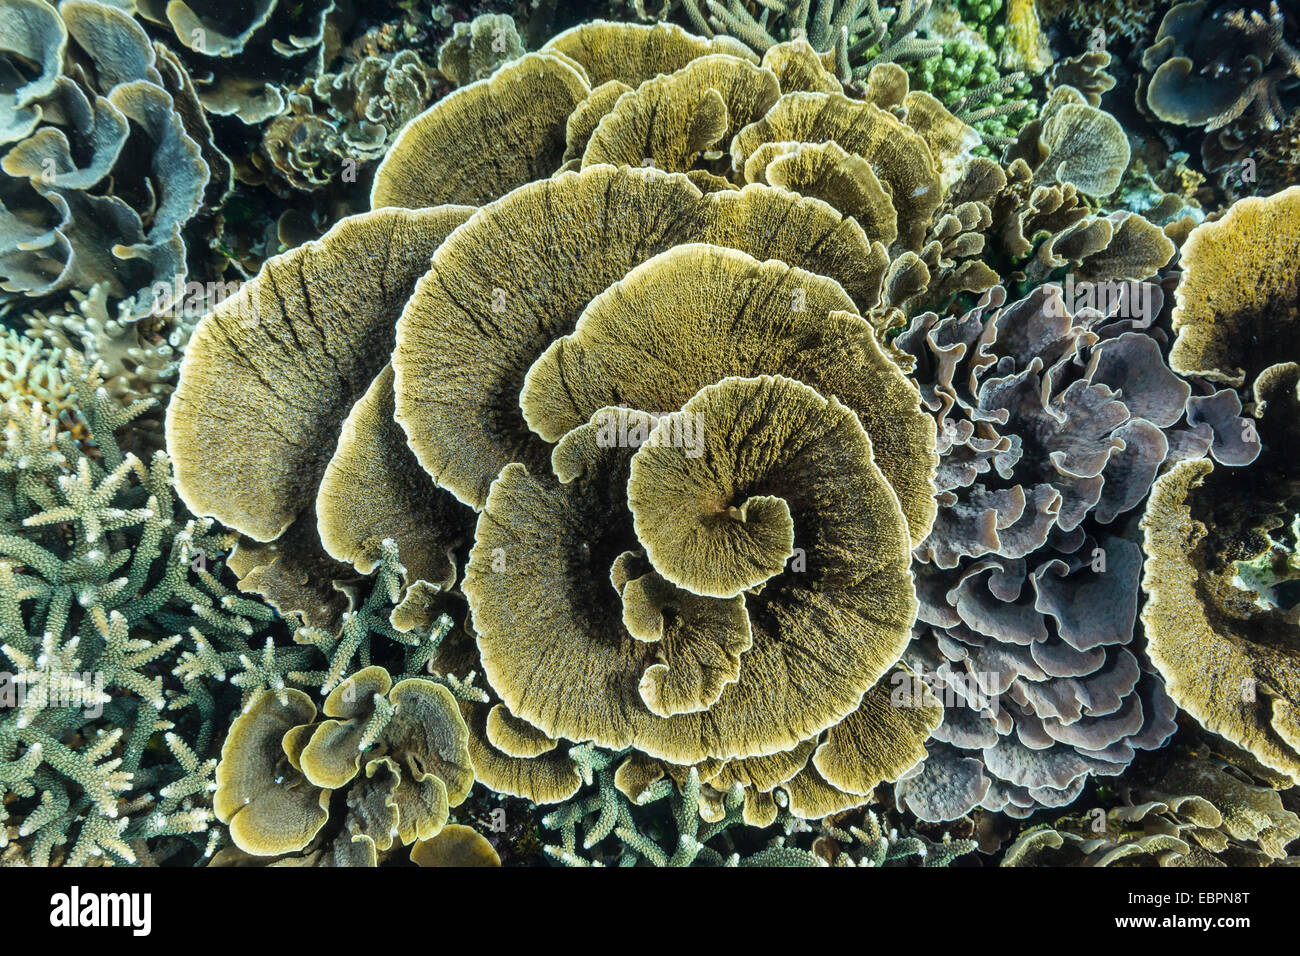 A profusion of hard and soft coral underwater on Siaba Kecil, Komodo Island National Park, Indonesia, Southeast Asia, Asia Stock Photo